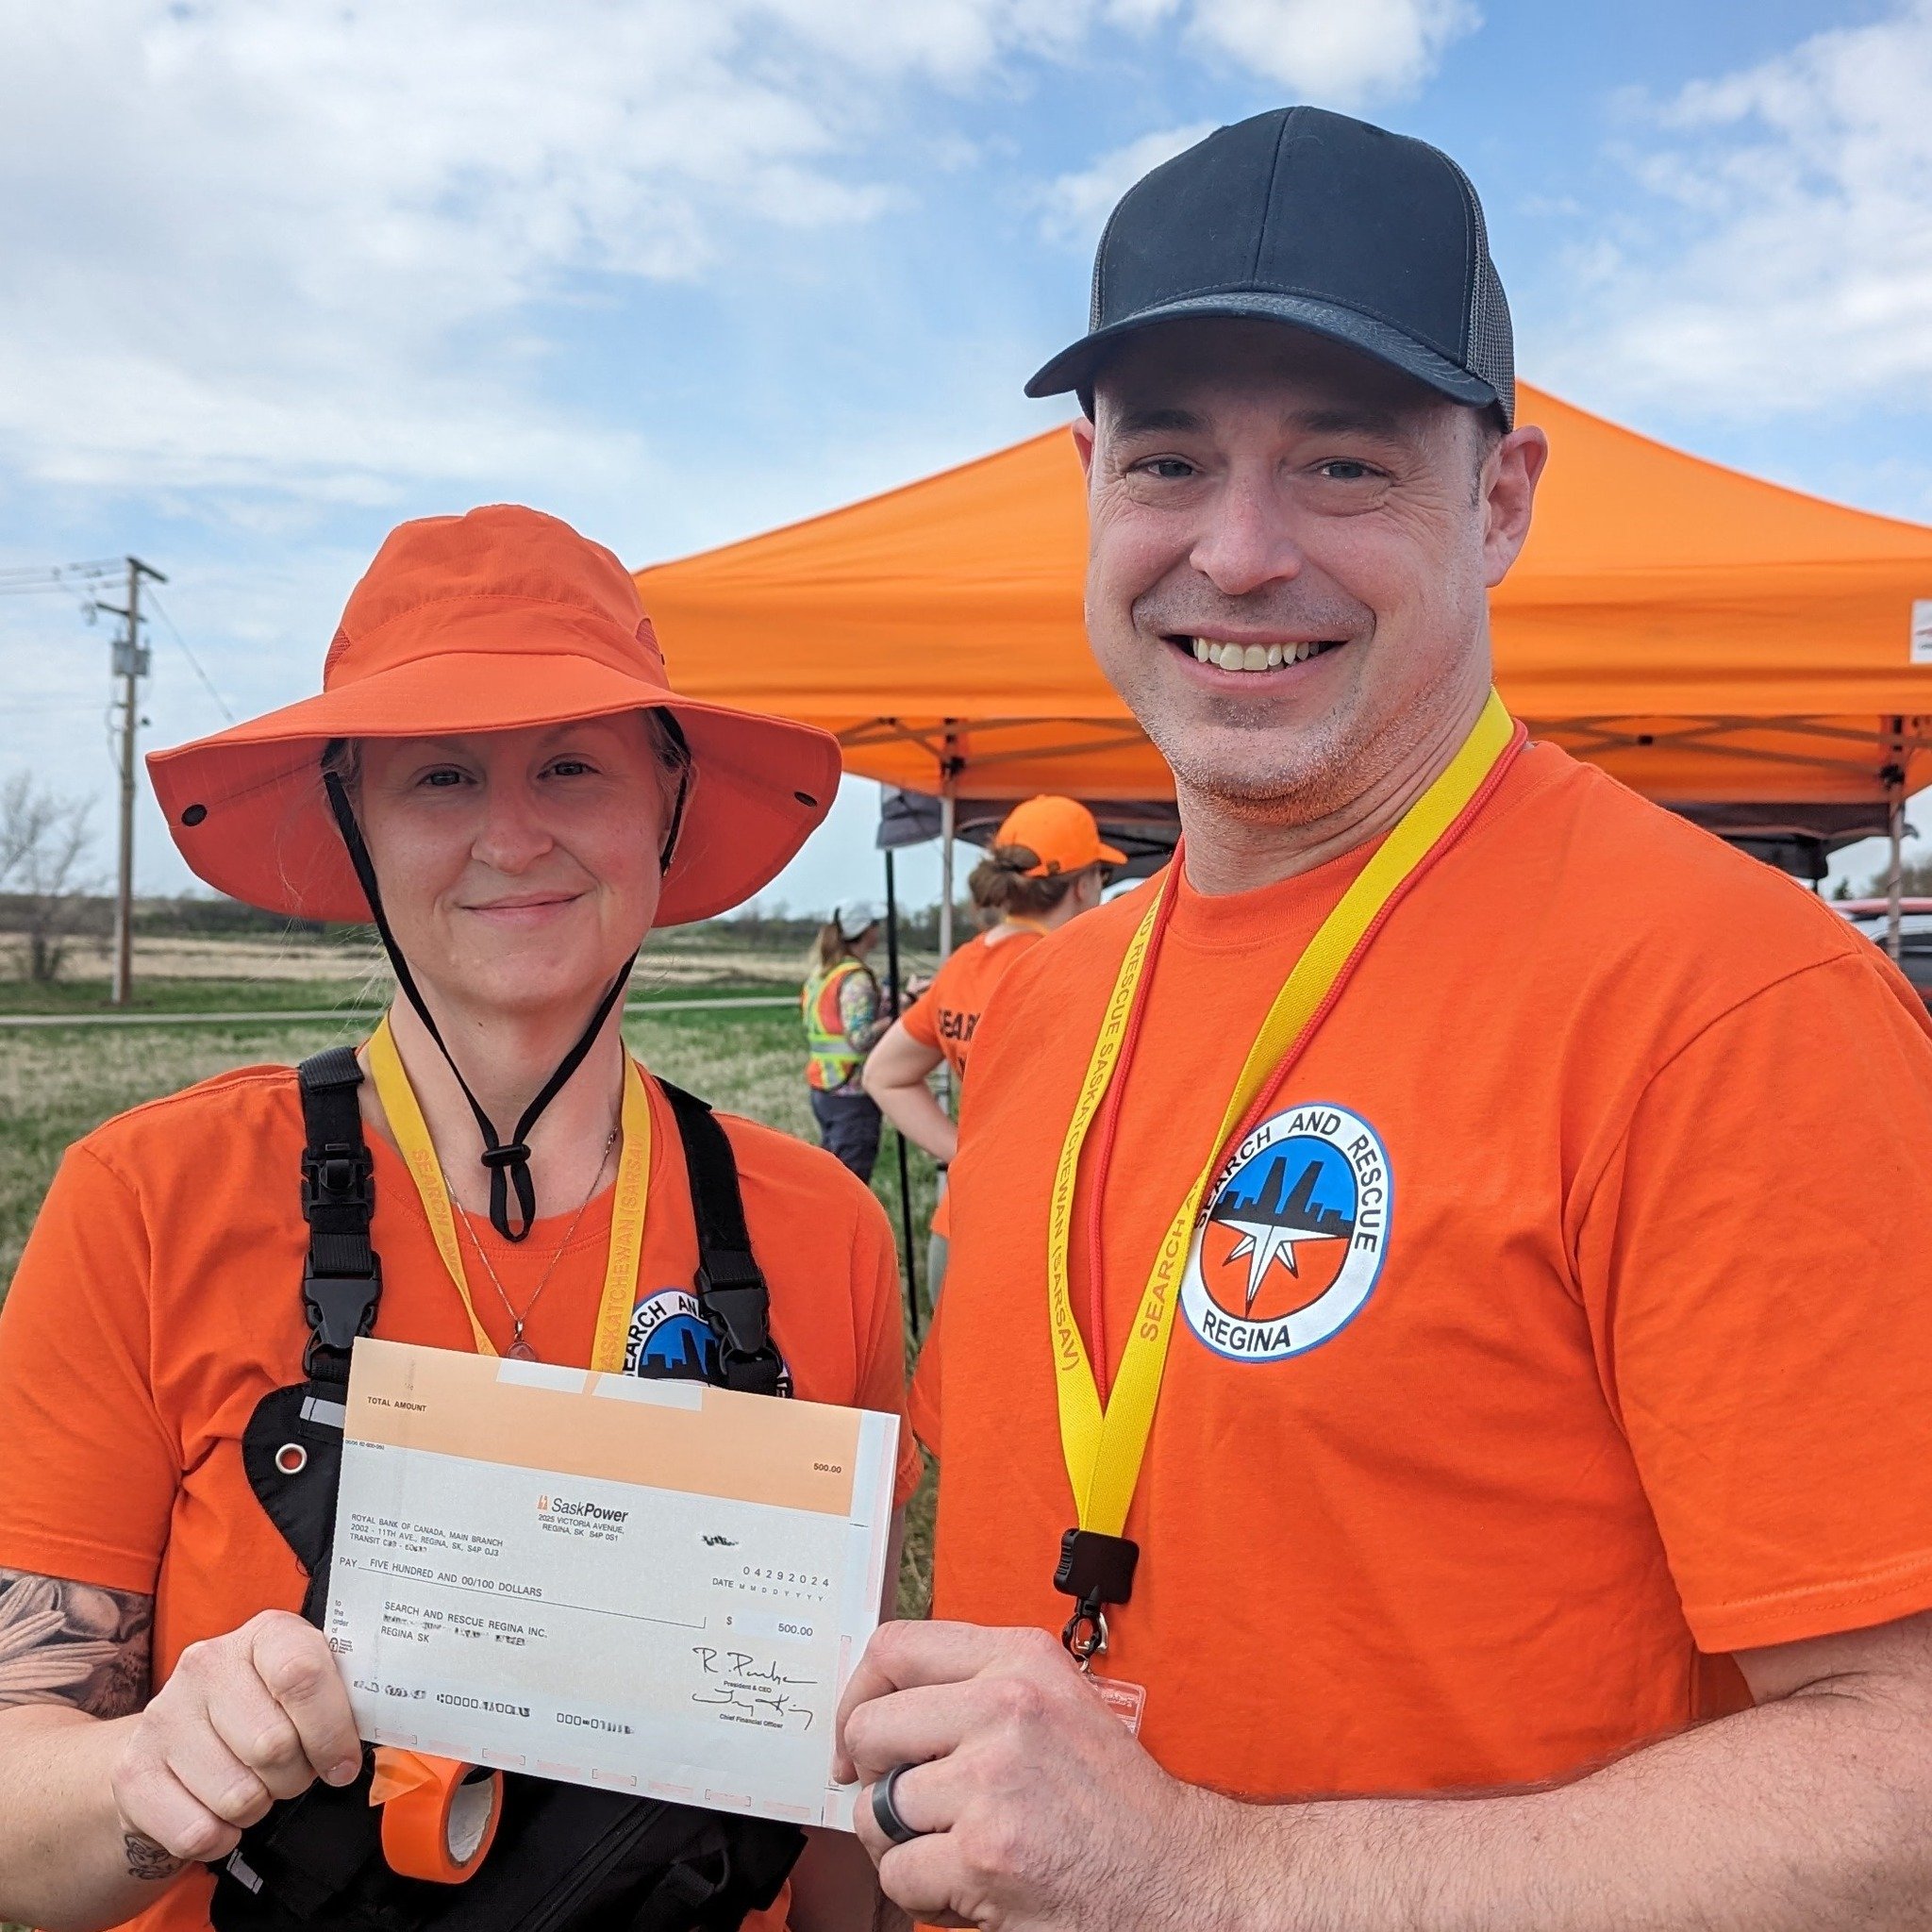 @saskpower employee Andy Crooks volunteered over 50 hours for Search and Rescue Regina Inc. and received $500.00 from SaskPower to present to this organization. SaskPower's Employee Volunteer Program rewards employees volunteering in their communitie